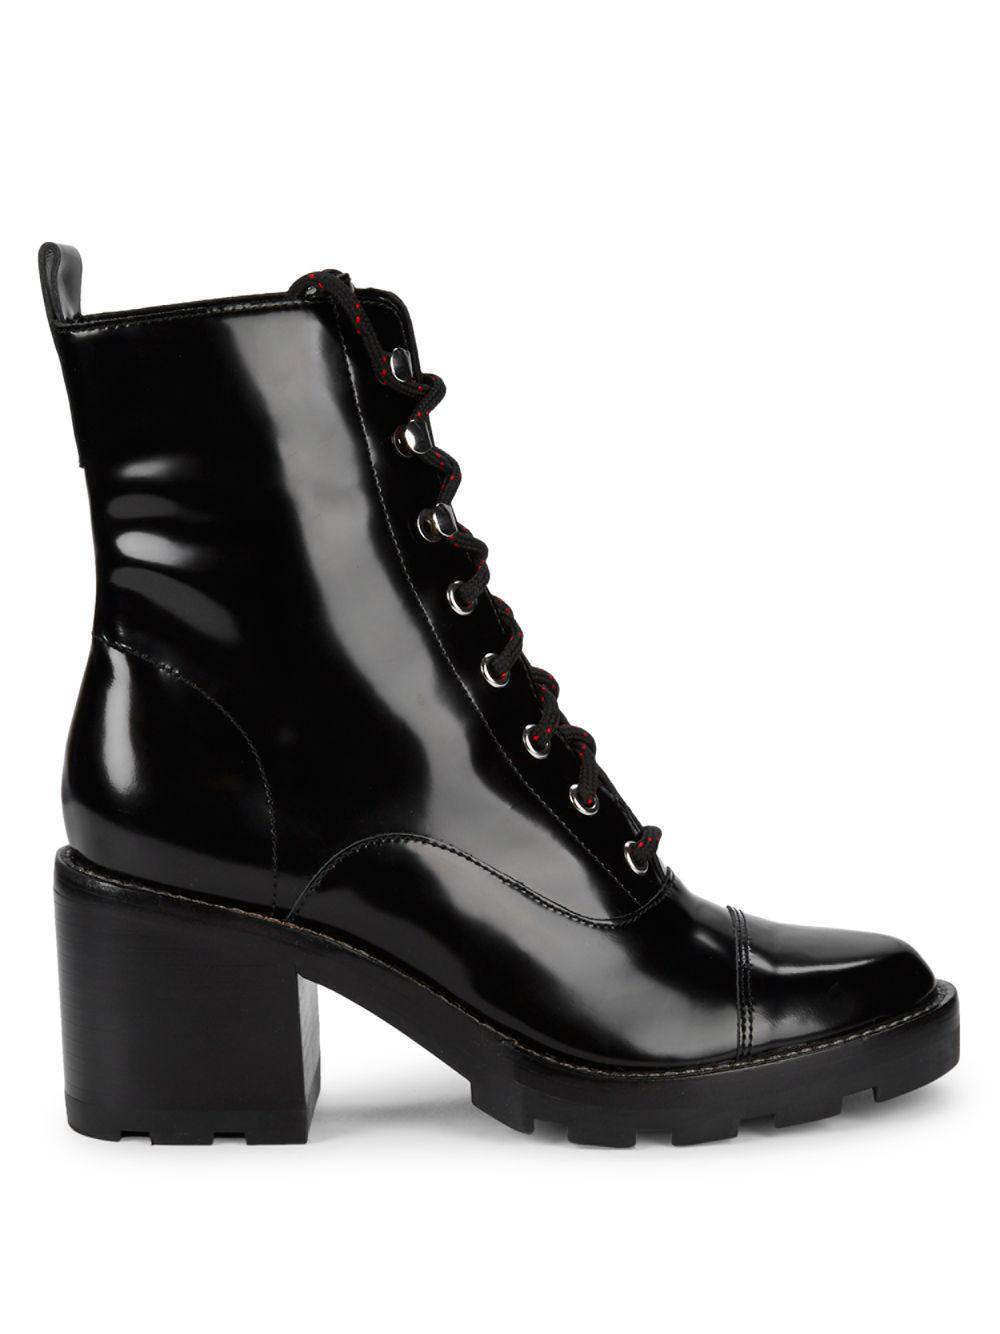 Marc Fisher Wanya Leather Combat Boots in Black Lyst